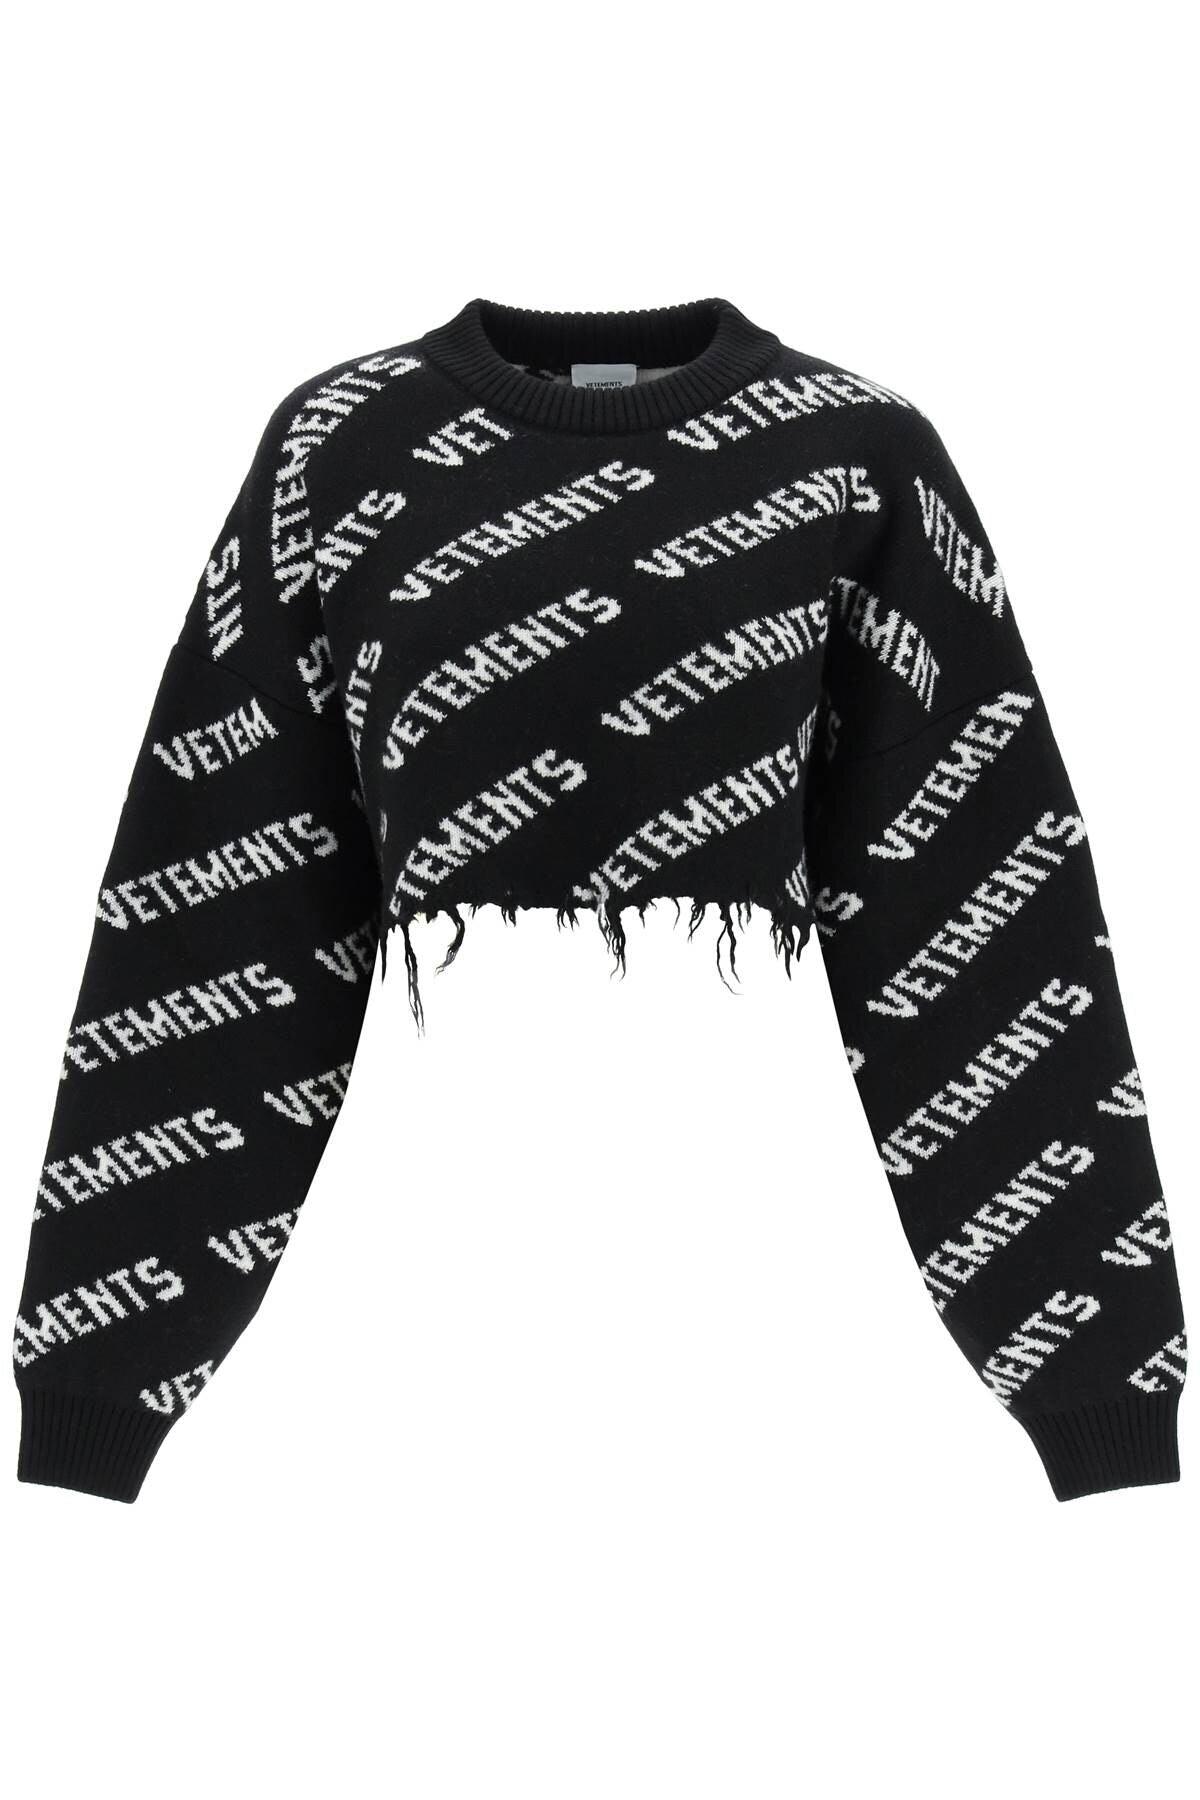 Vetements Cropped Monogram Sweater With Ripped Hem in Black | Lyst